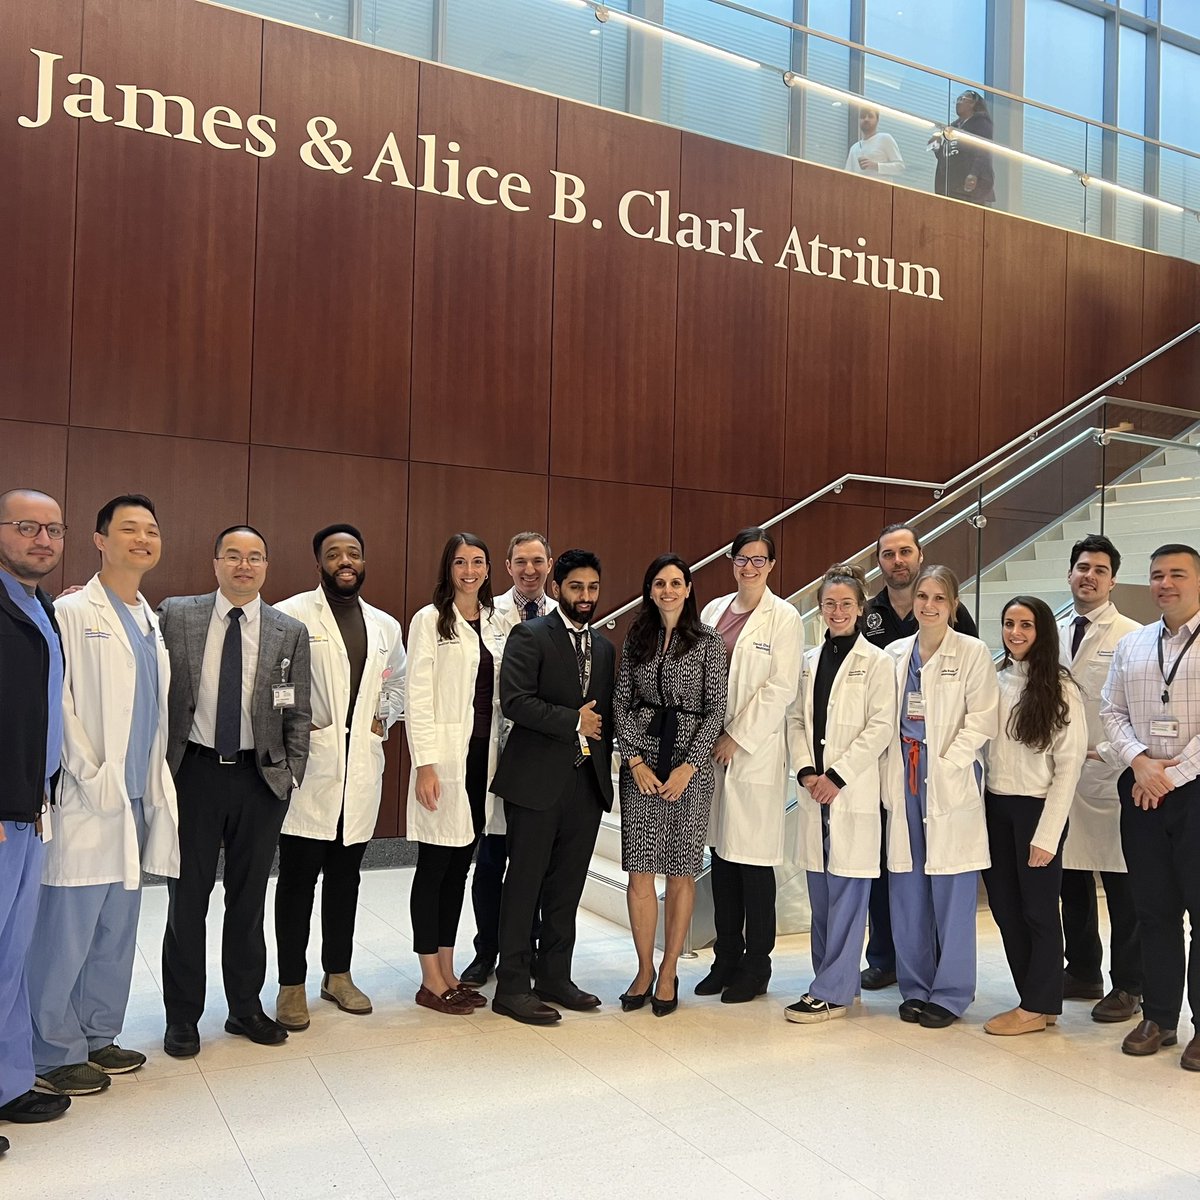 We are honored to have hosted @StavTjoumakaris from @TJUHNeurosurg for Thursday academic conference! Dr. Tjoumakaris gave a fantastic talk on dual training in vascular neurosurgery as well as pearls on difficult vascular cases. We hope you come back and see us! #Neurosurgery